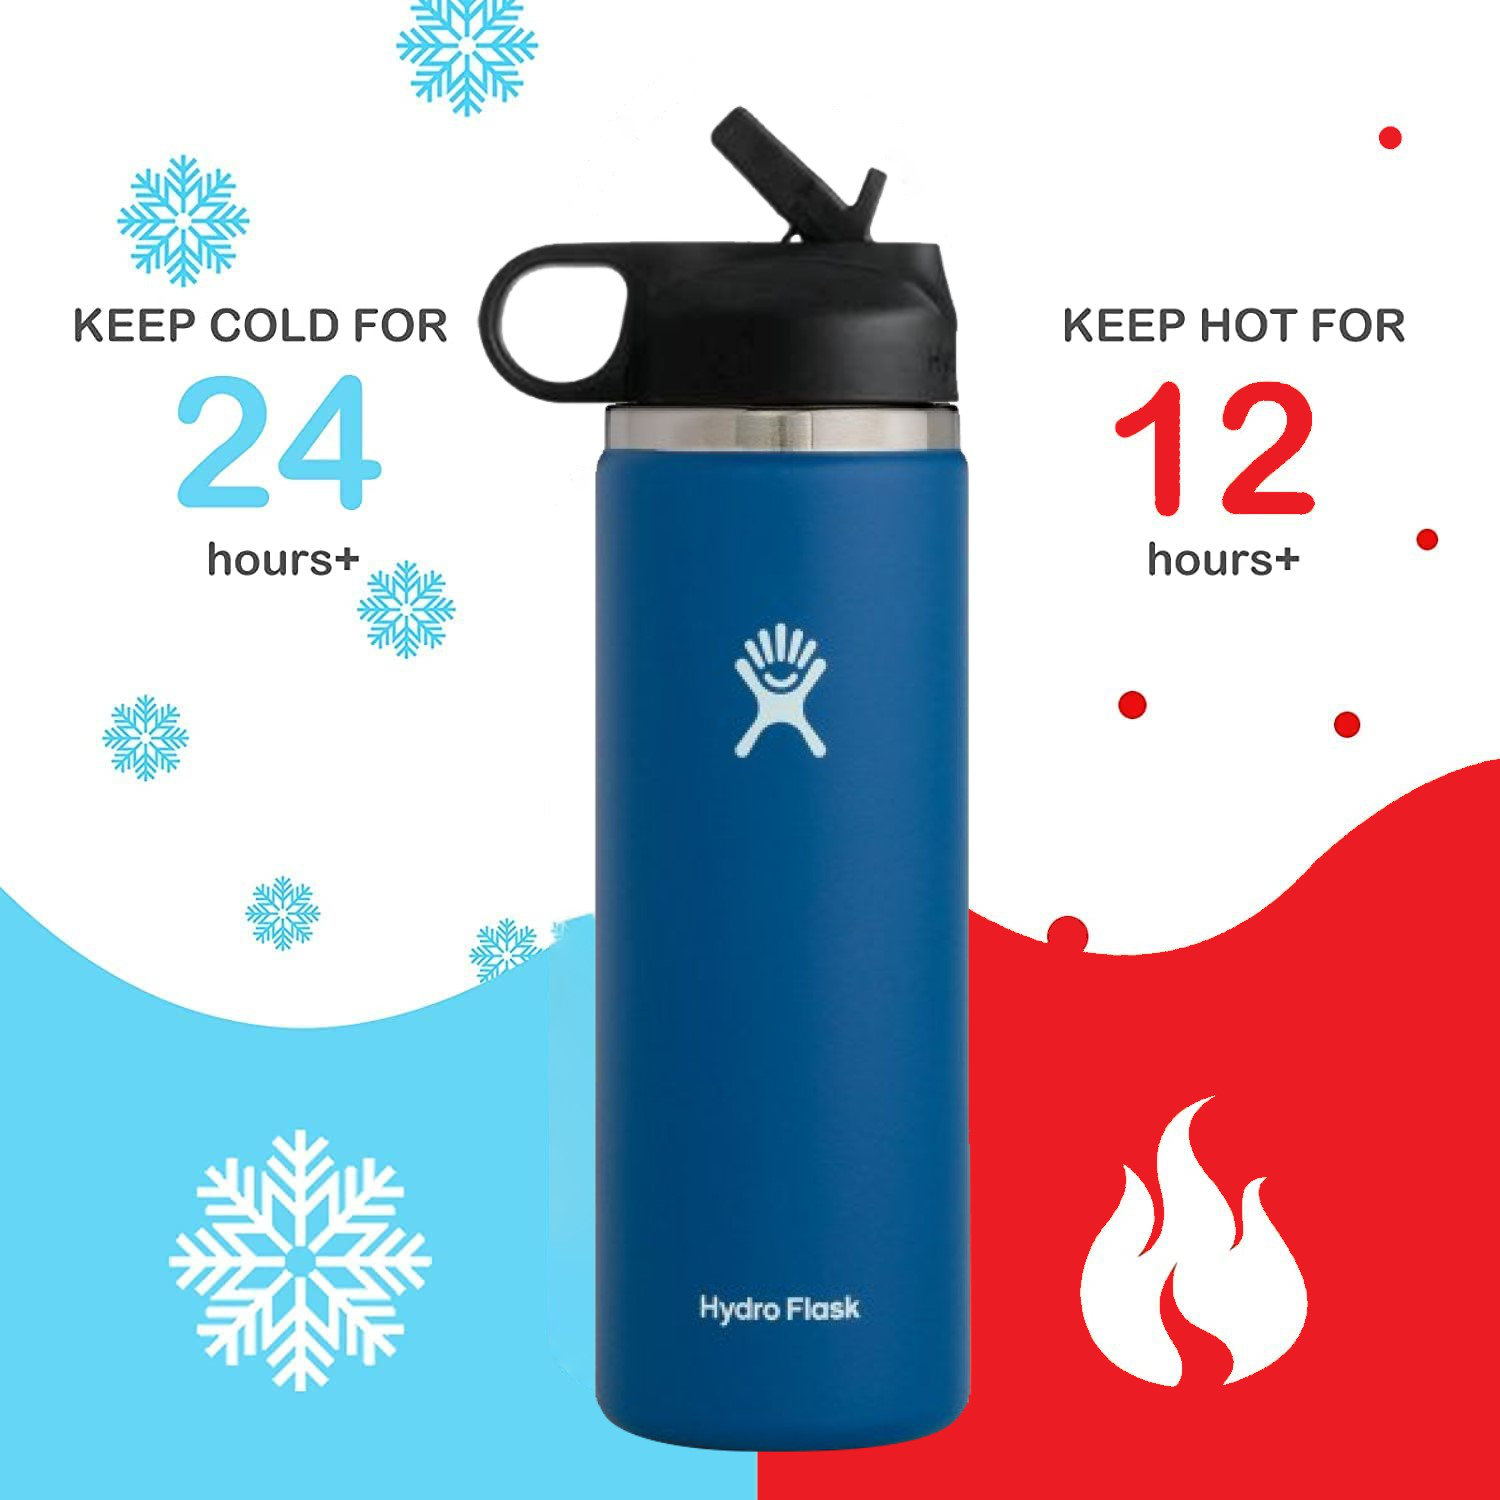  Hydro Flask Flex Cap Bottle with Boot - Stainless Steel  Reusable Water Bottle - Vacuum Insulated - 32 oz (Blue): Home & Kitchen